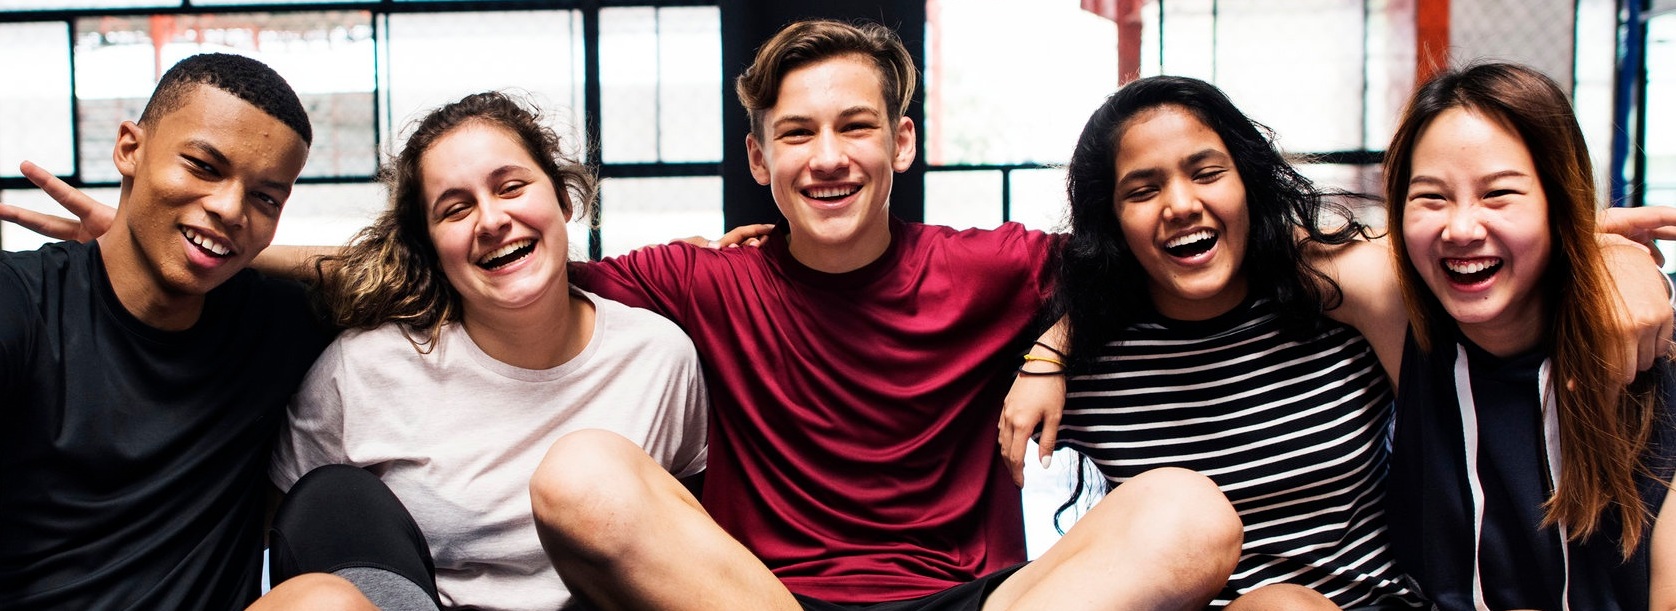  Nearly 31% of high school seniors have never used any substance, including alcohol, marijuana, and cigarettes.    Teens Are Making One Choice     Learn about the IBH  One Choice  prevention initiative  